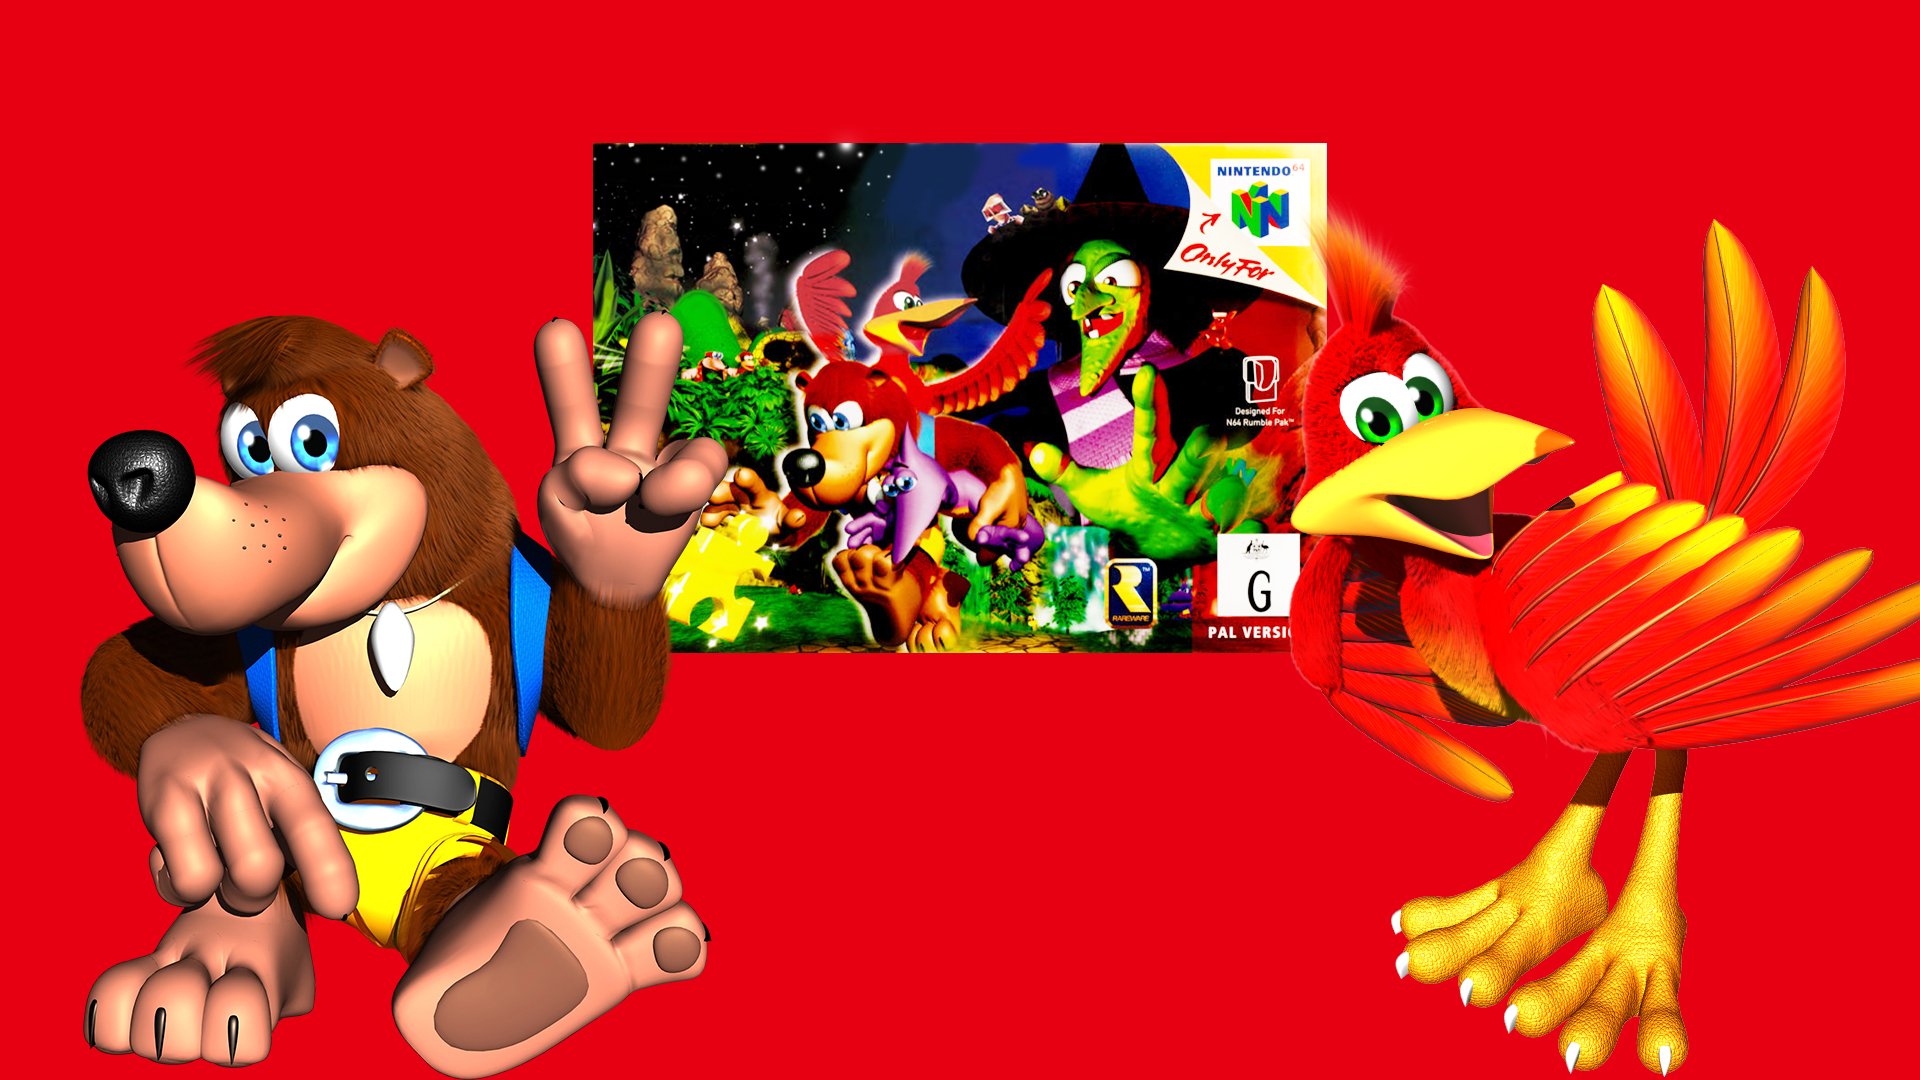 N64 Classic 'Banjo-Kazooie' Is Coming To Nintendo Switch Really Soon